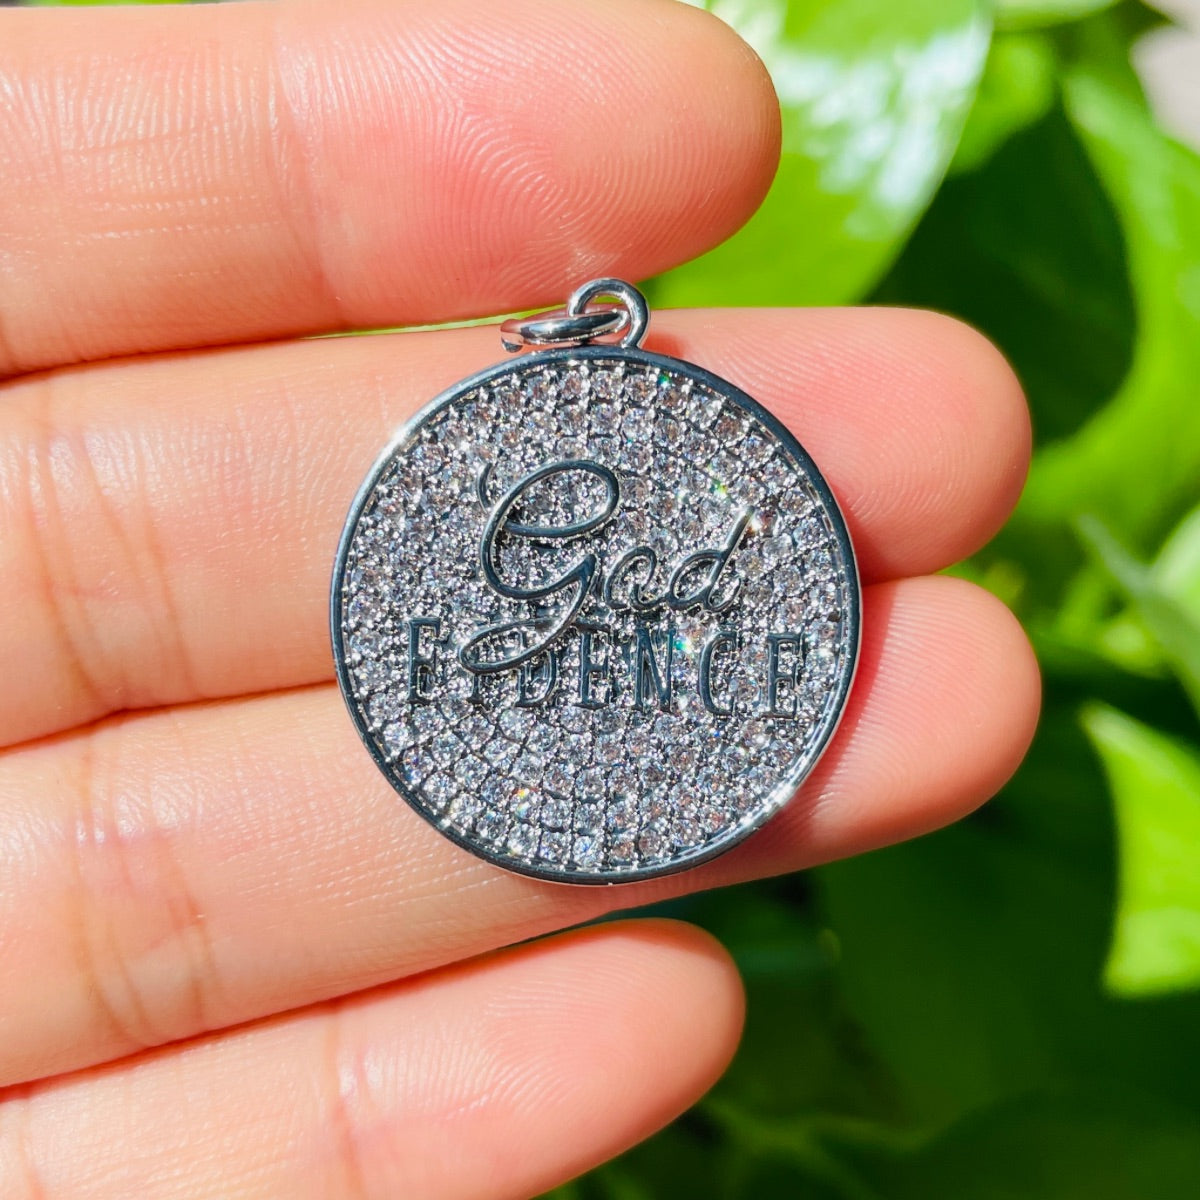 10pcs/lot 25mm CZ Pave Round Plate GODFIDENCE Quote Charms Silver CZ Paved Charms Christian Quotes Discs On Sale Charms Beads Beyond